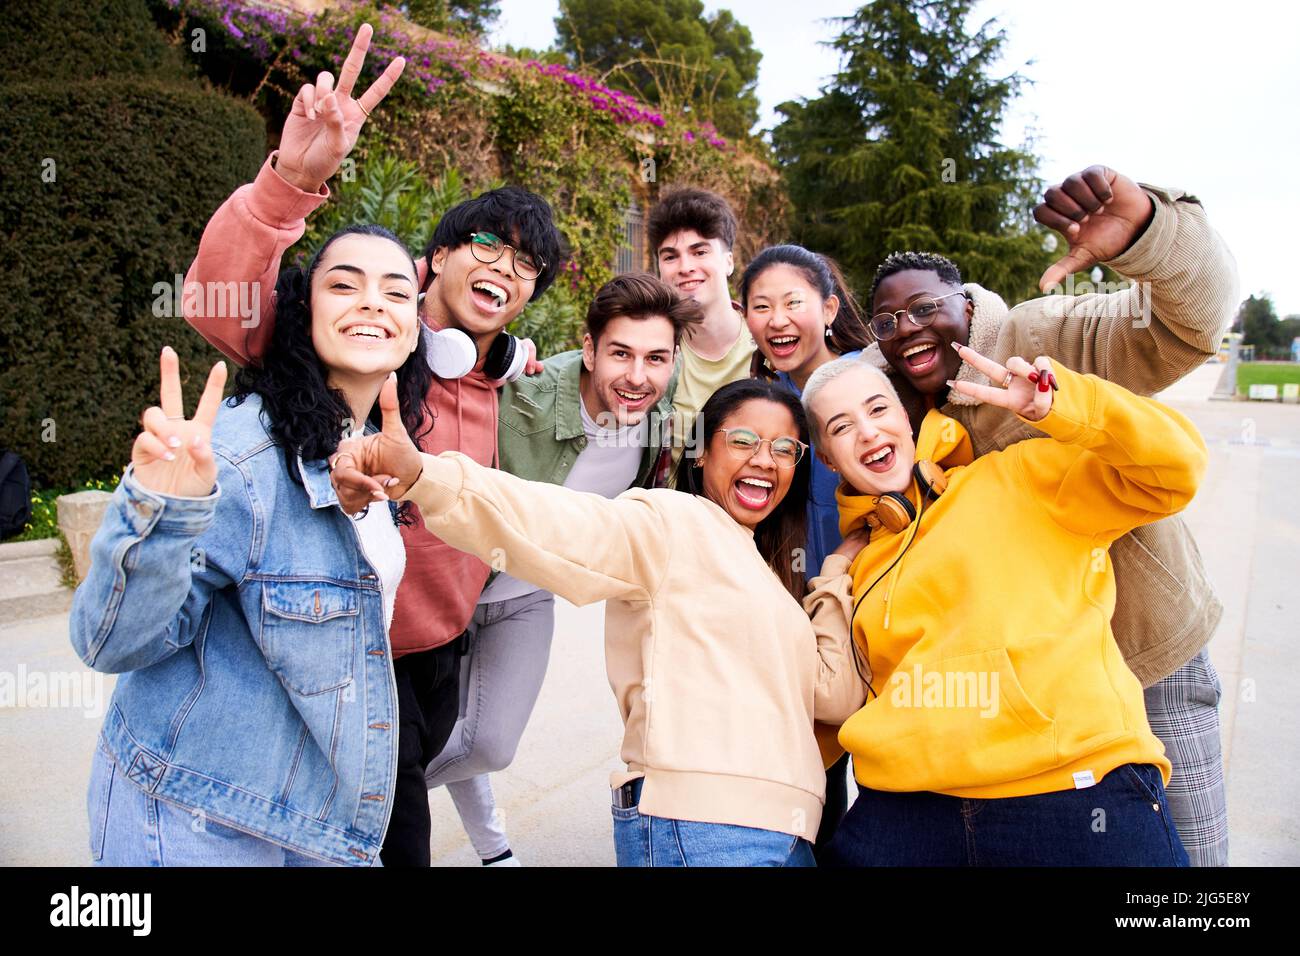 Big group of cheerful Motivated and excited young friends taking selfie portrait. Happy people looking at the camera smiling. Concept of community Stock Photo